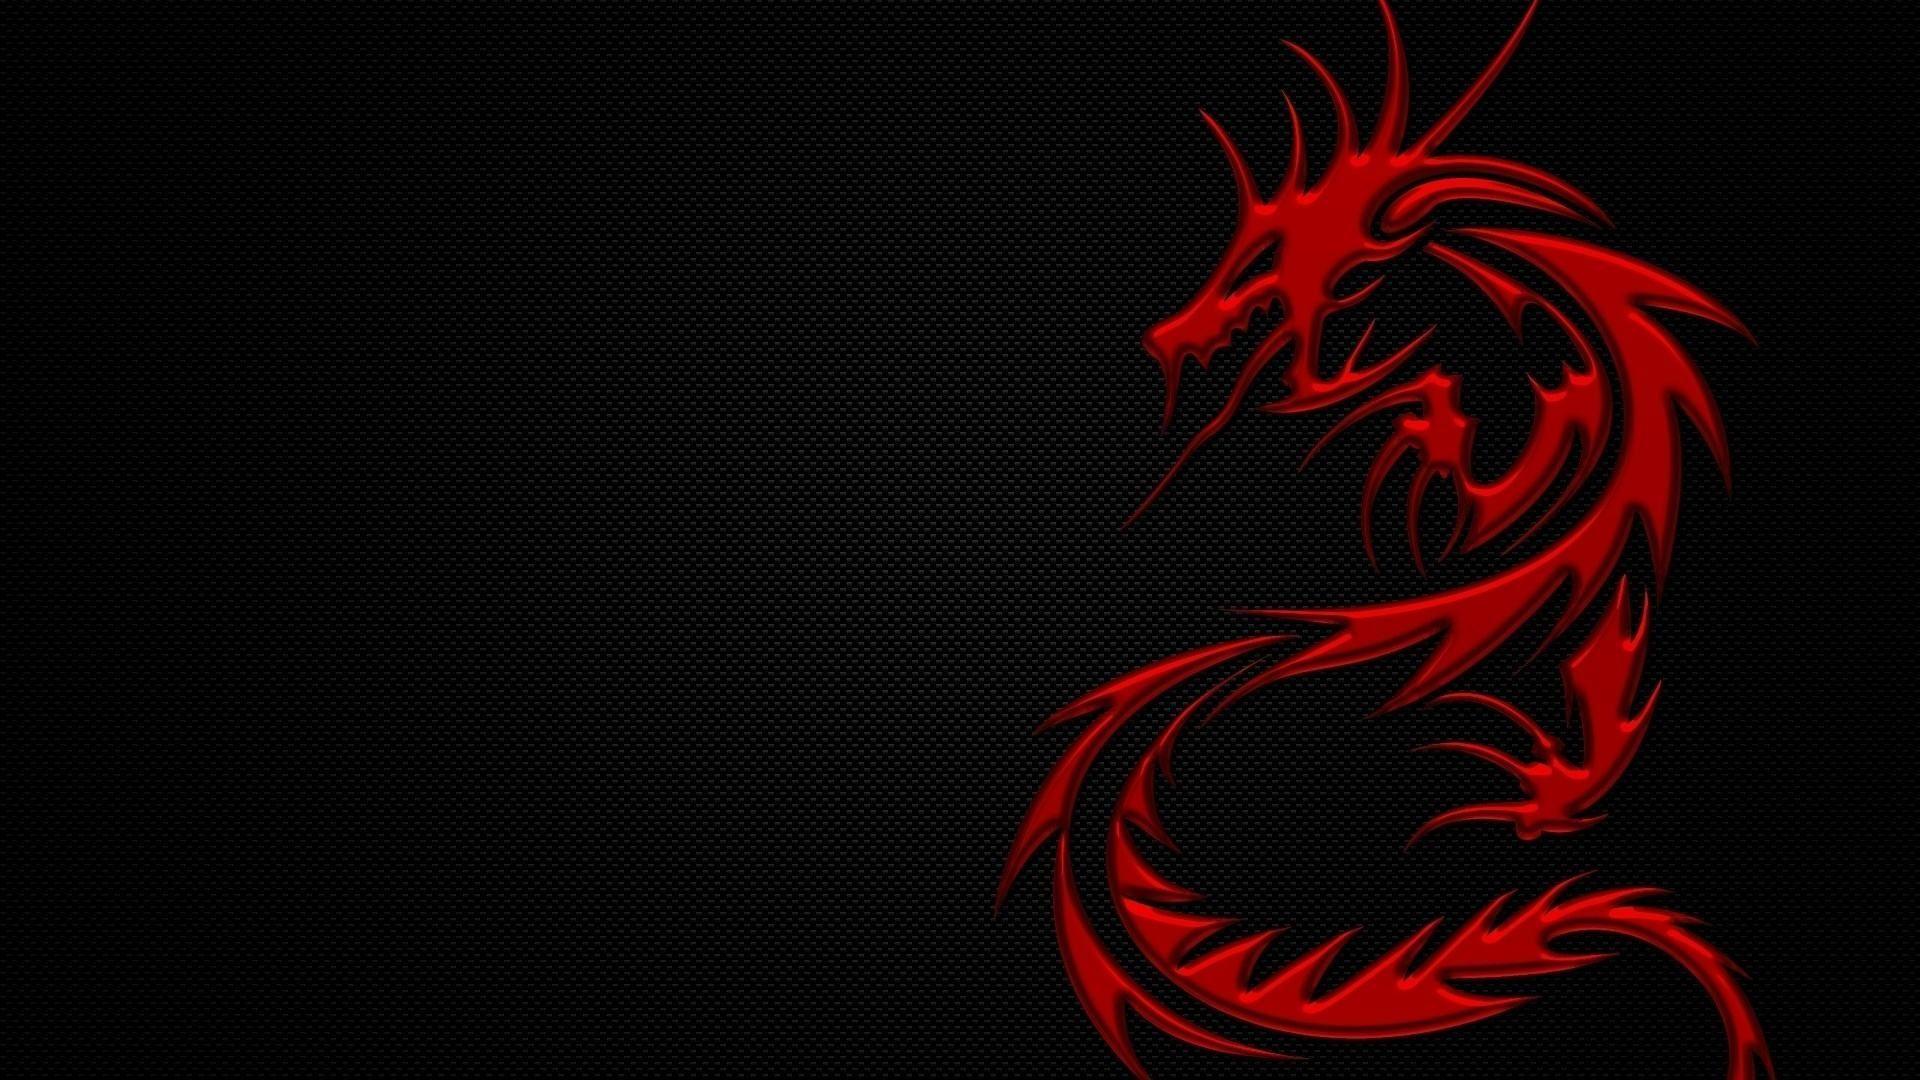 The Dragon Wallpaper Android Apps on Google Play. HD Wallpaper